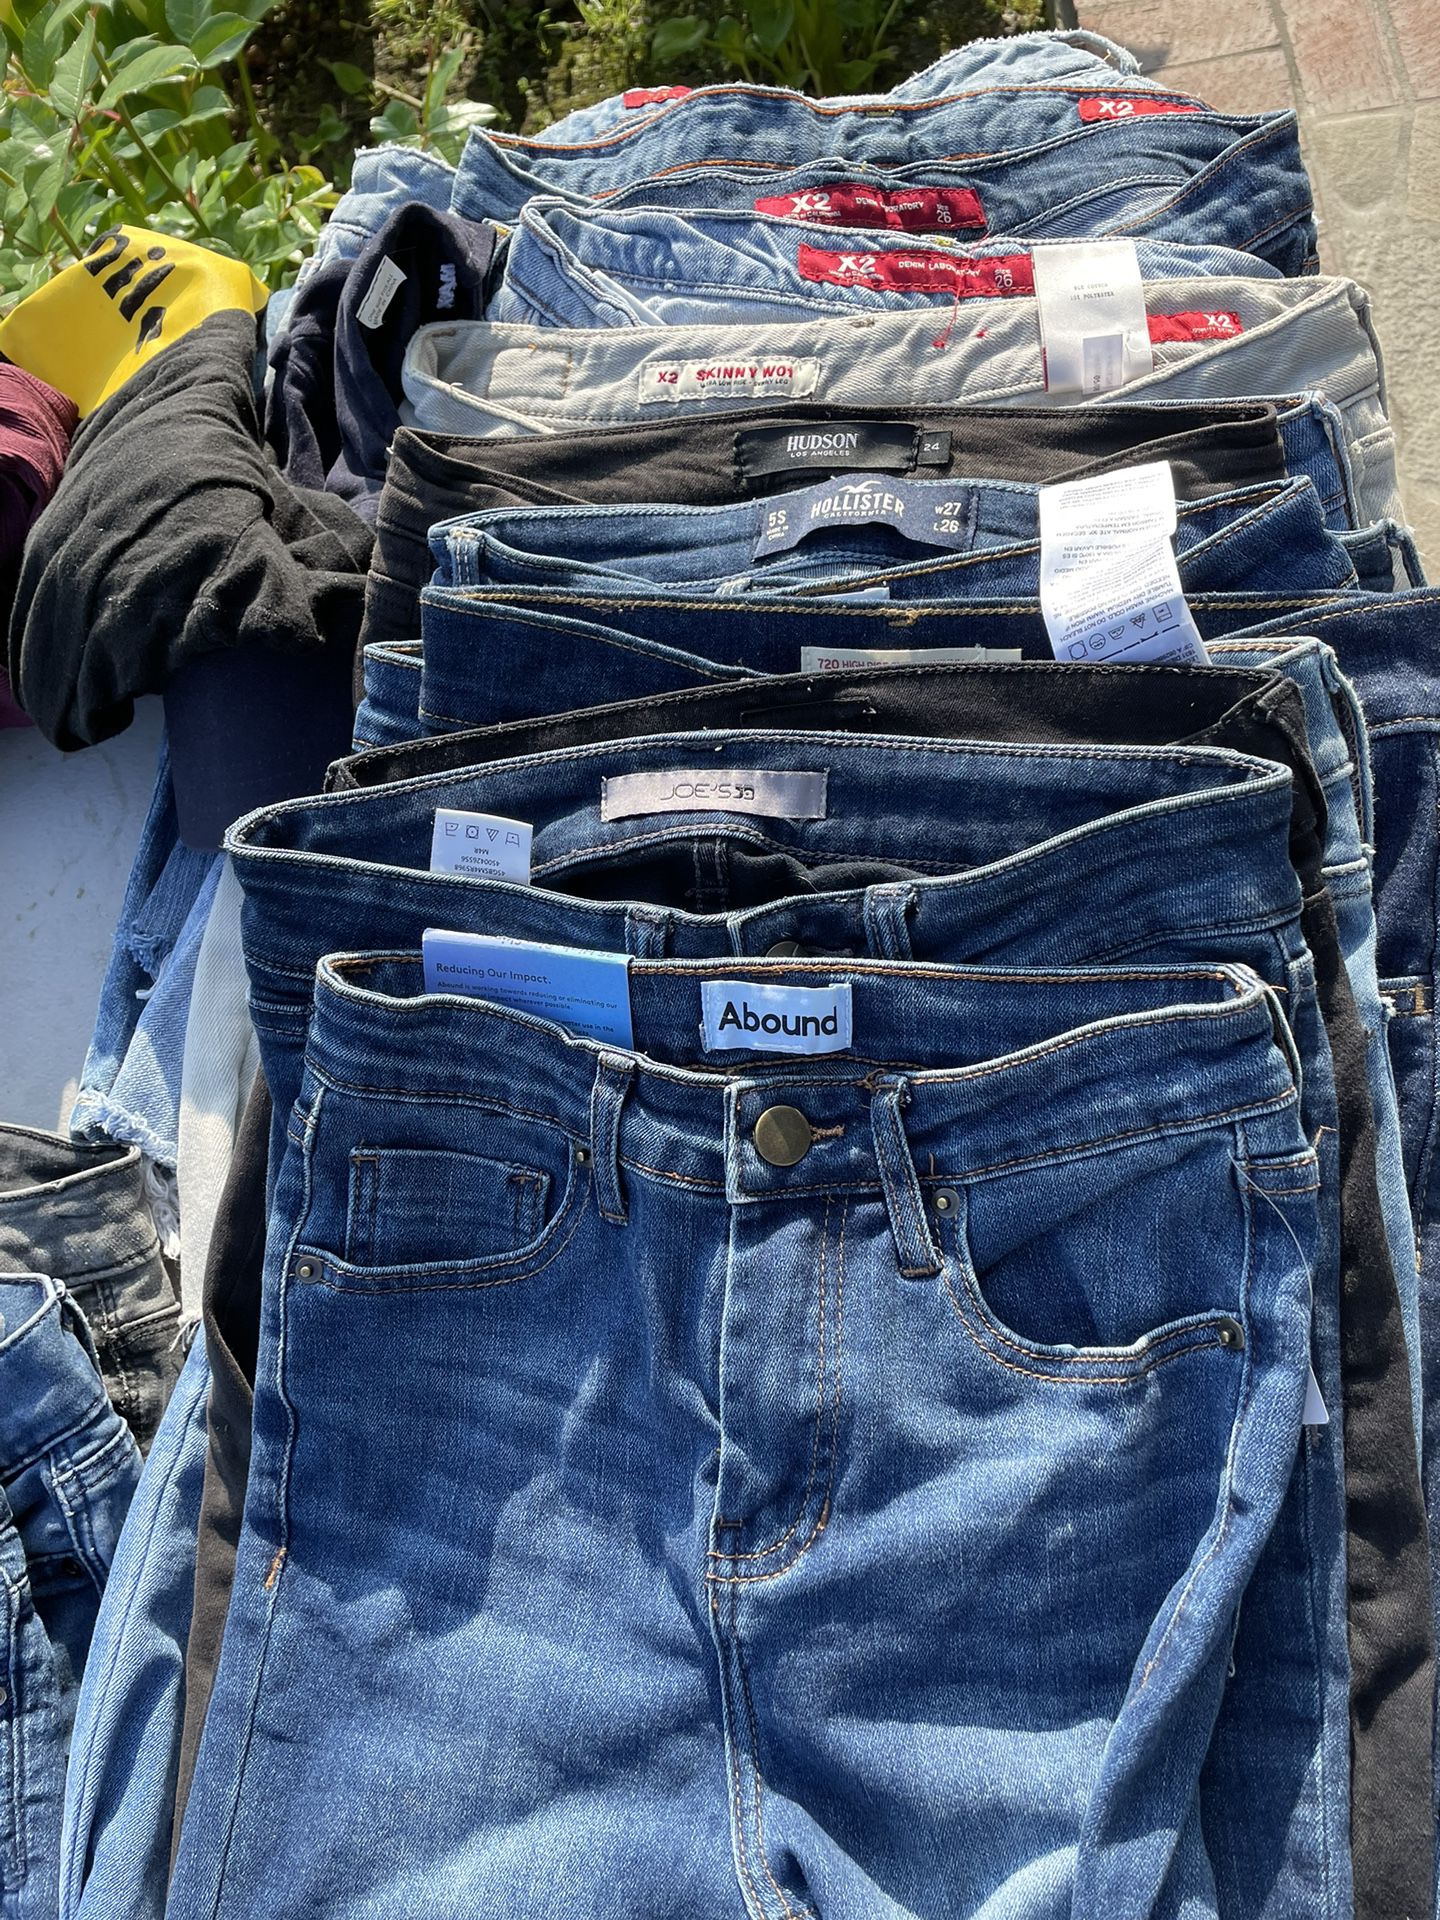 15 PAIRS OF SKINNY JEANS 24-24 PICK UP TODAY 